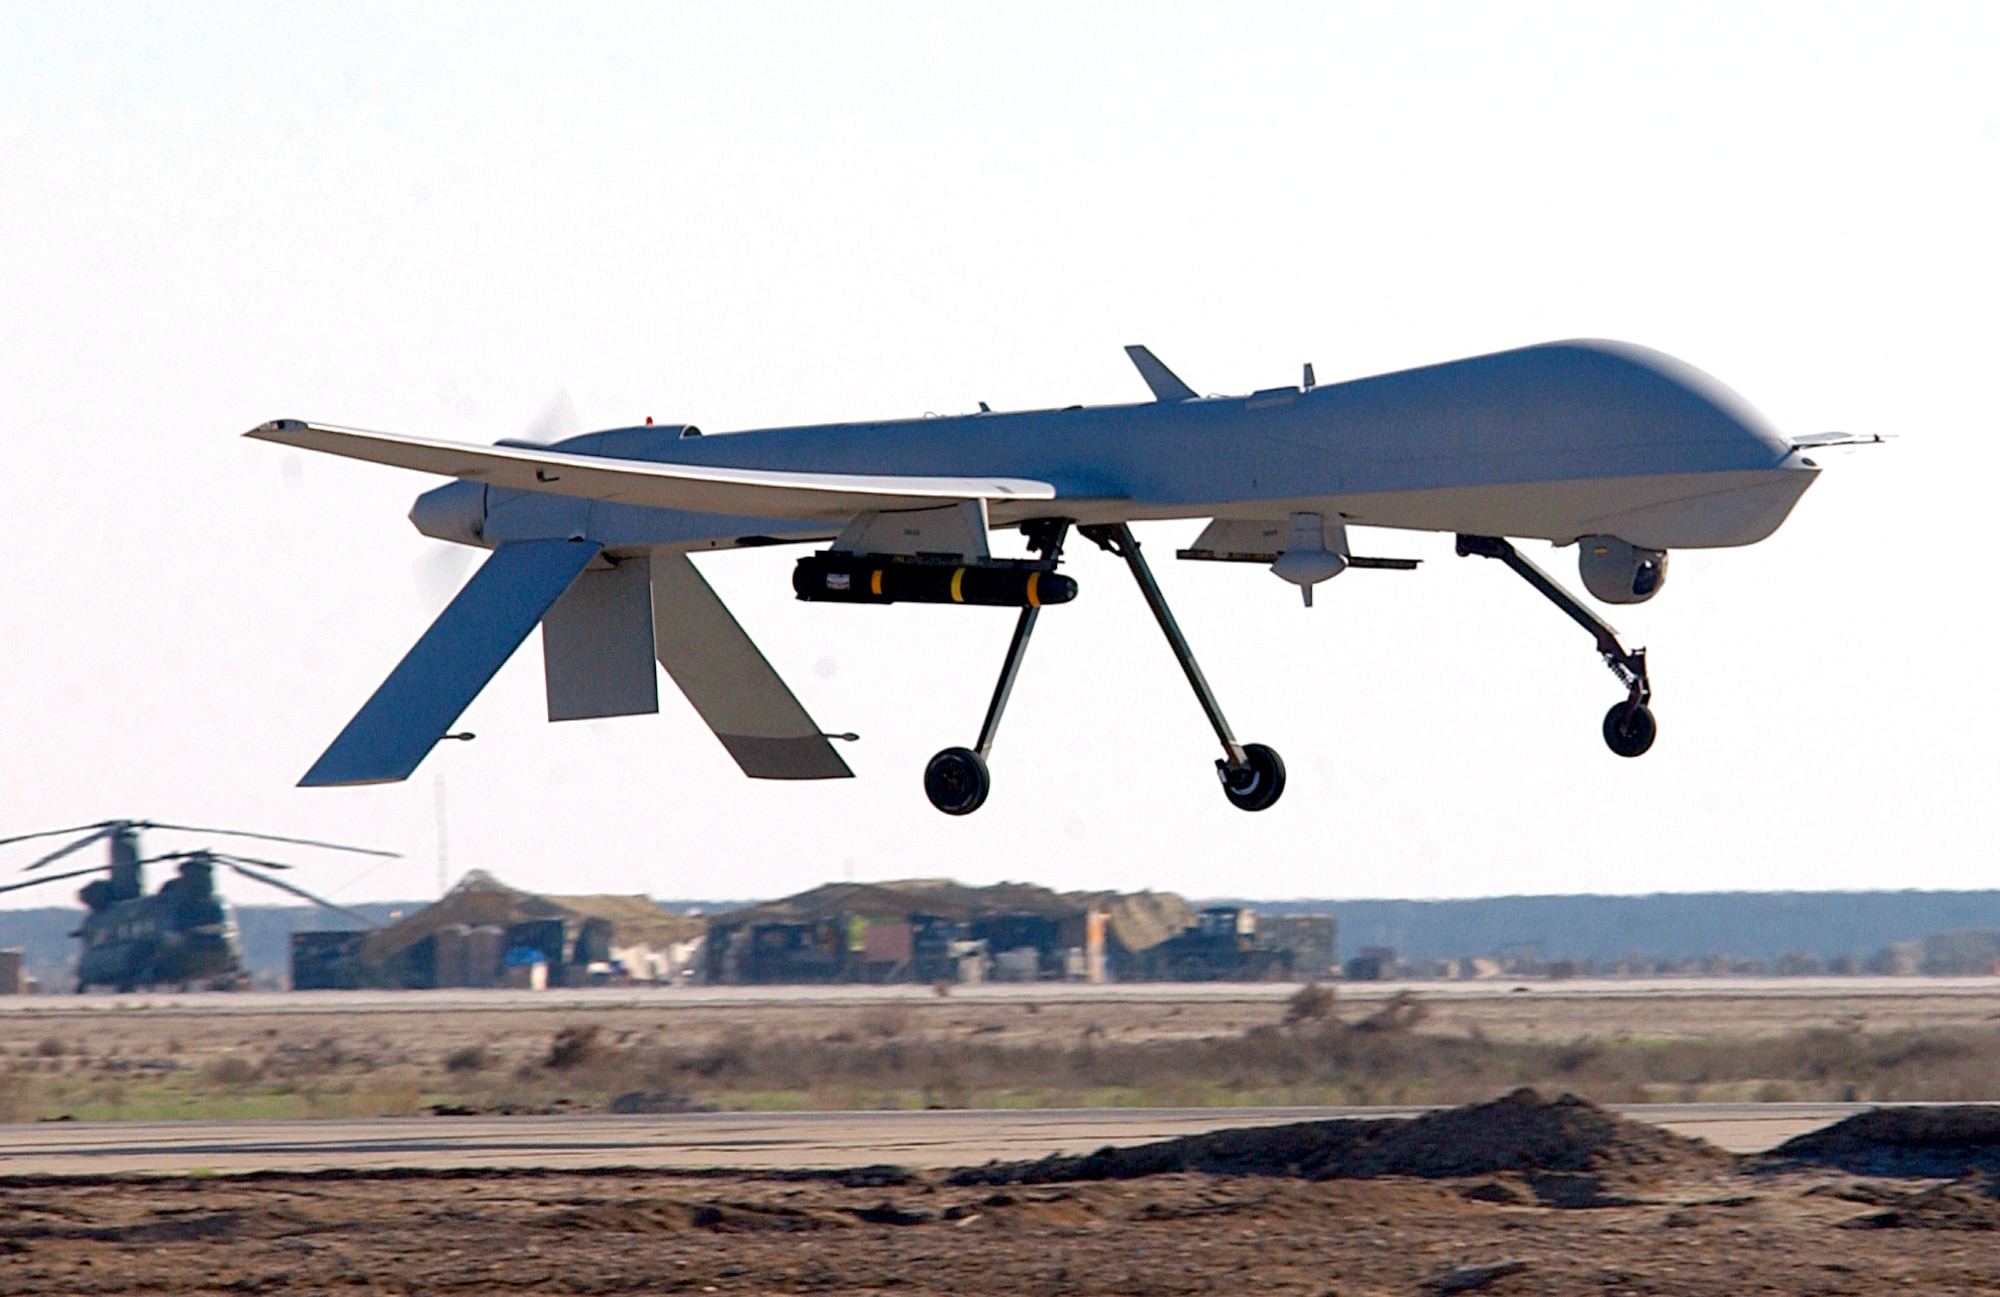 An MQ-1 Predator unmanned aerial vehicle from the 46th Expeditionary Reconnaissance Squadron lands Jan. 20 at Tallil Air Base, Iraq. The Predator is a remotely piloted vehicle that provides real-time surveillance imagery supporting the war on terrorism. (U.S. Air Force photo/Staff Sgt. Suzanne M. Jenkins)